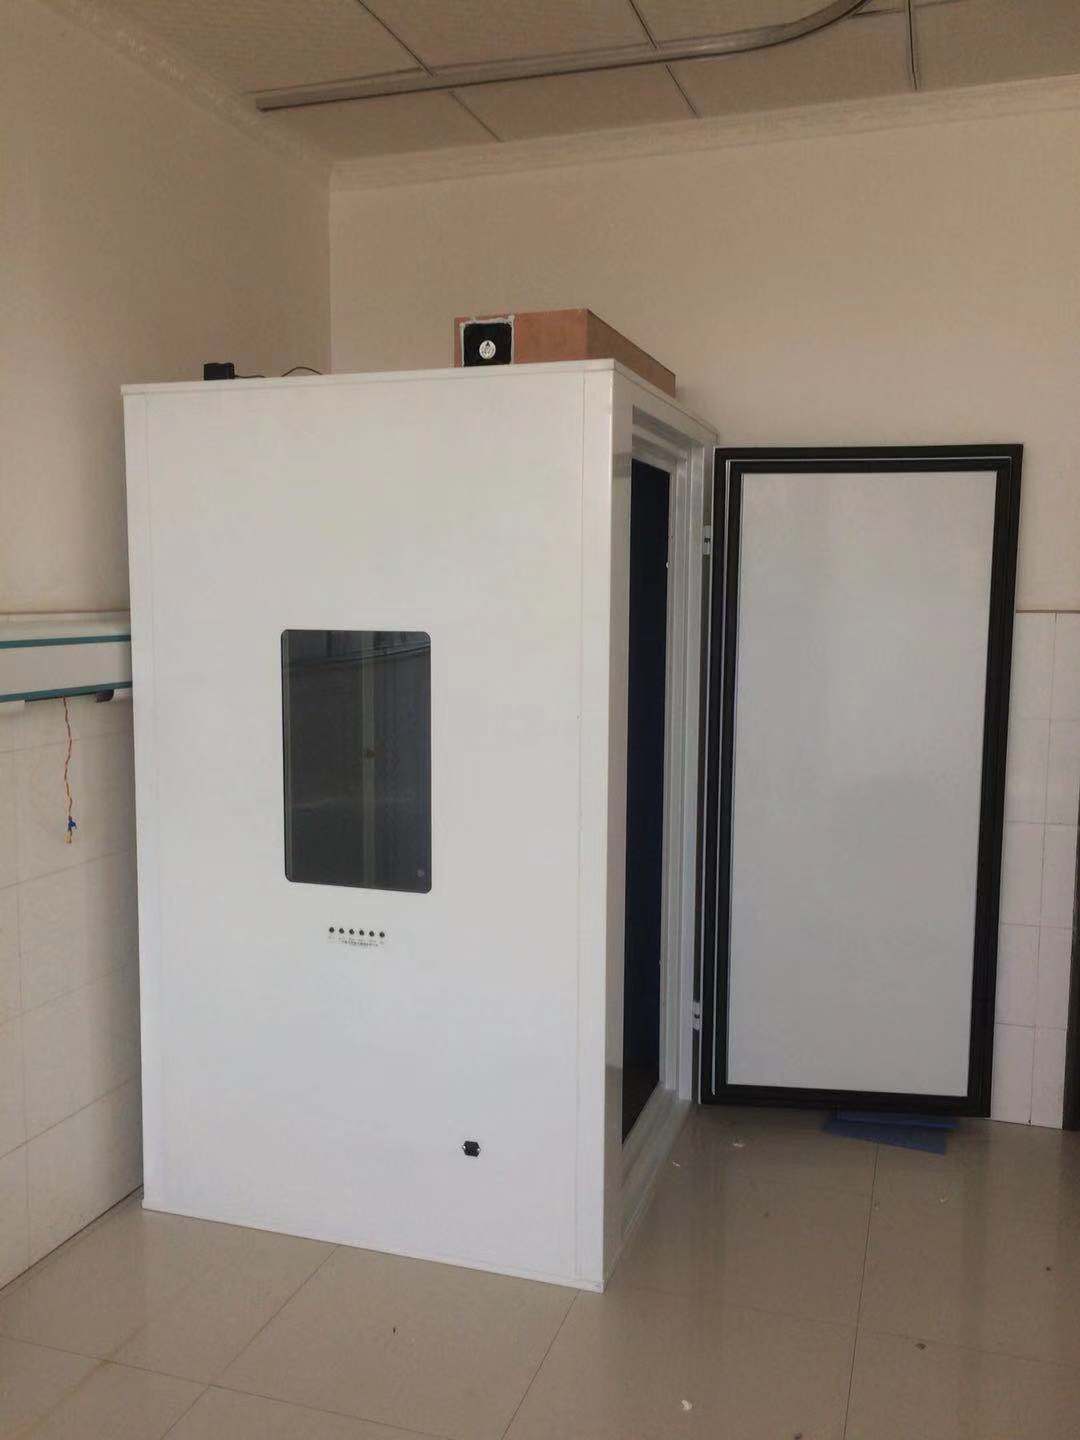 Single door hearing test sound booth,Hearing test sound booth,Hearing test sound booth supplier